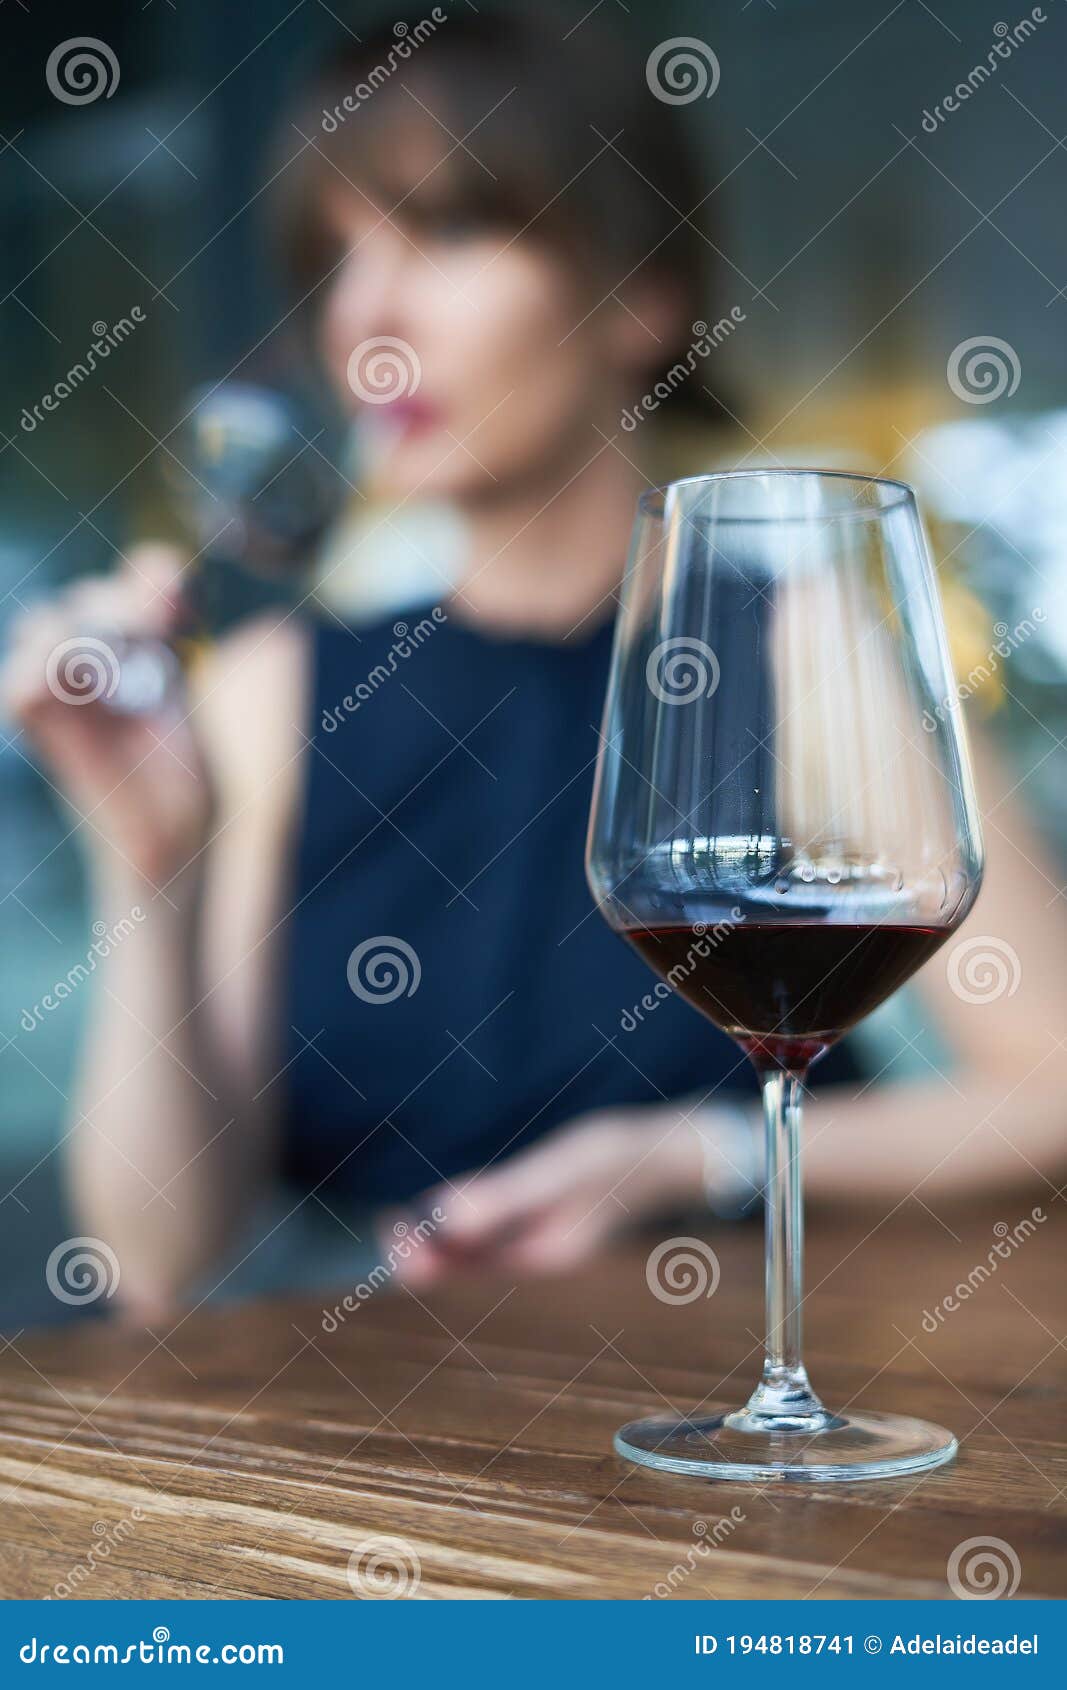 winetasting concept. focus on wineglass, woman drinking wine in the background